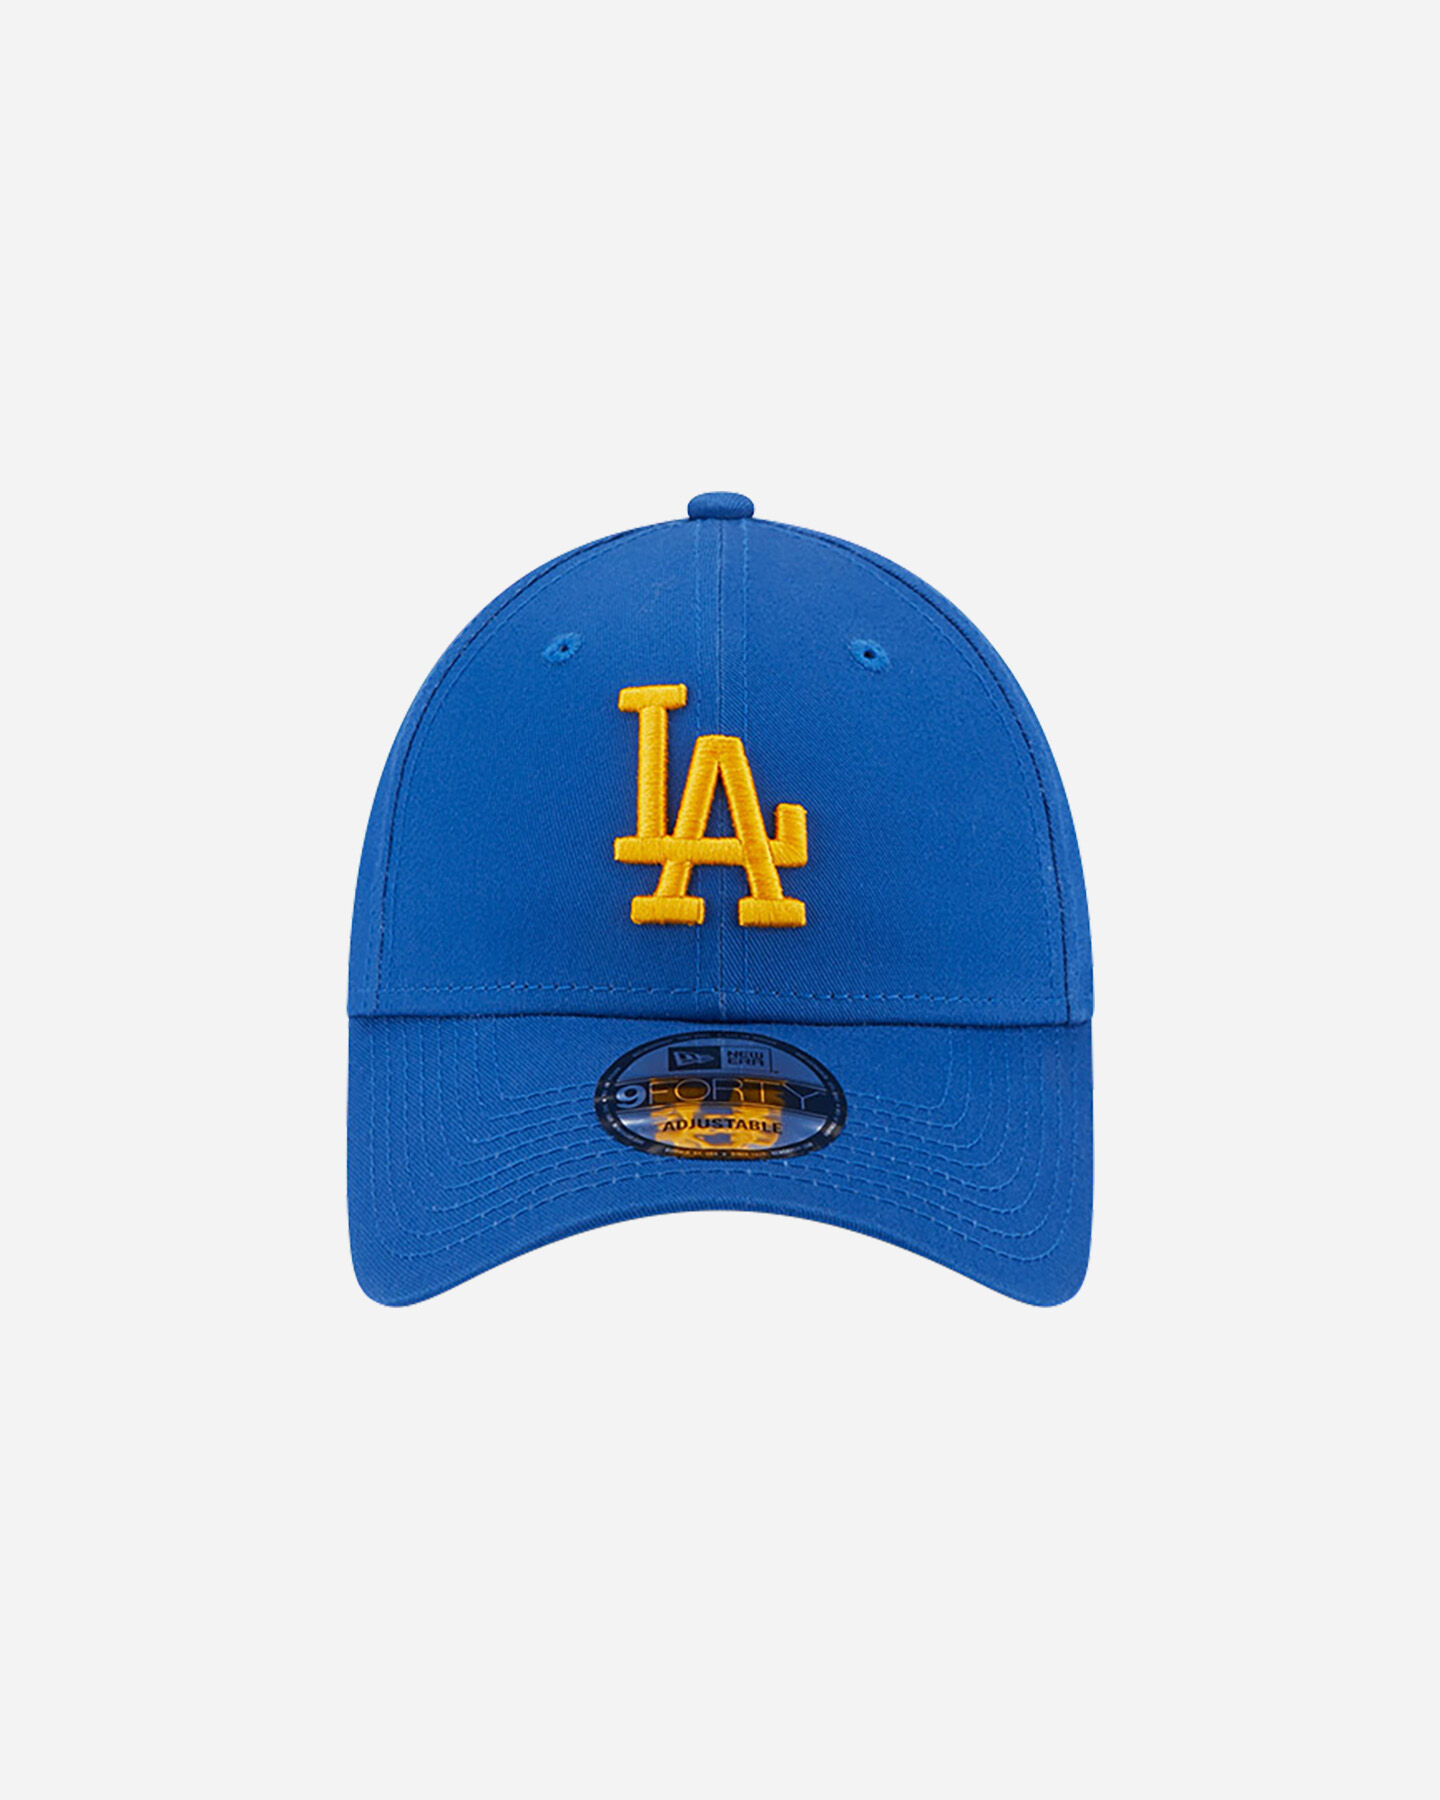  Cappellino NEW ERA 9FORTY MLB LEAGUE LOS ANGELES DODGERS  S5606281|420|OSFM scatto 1